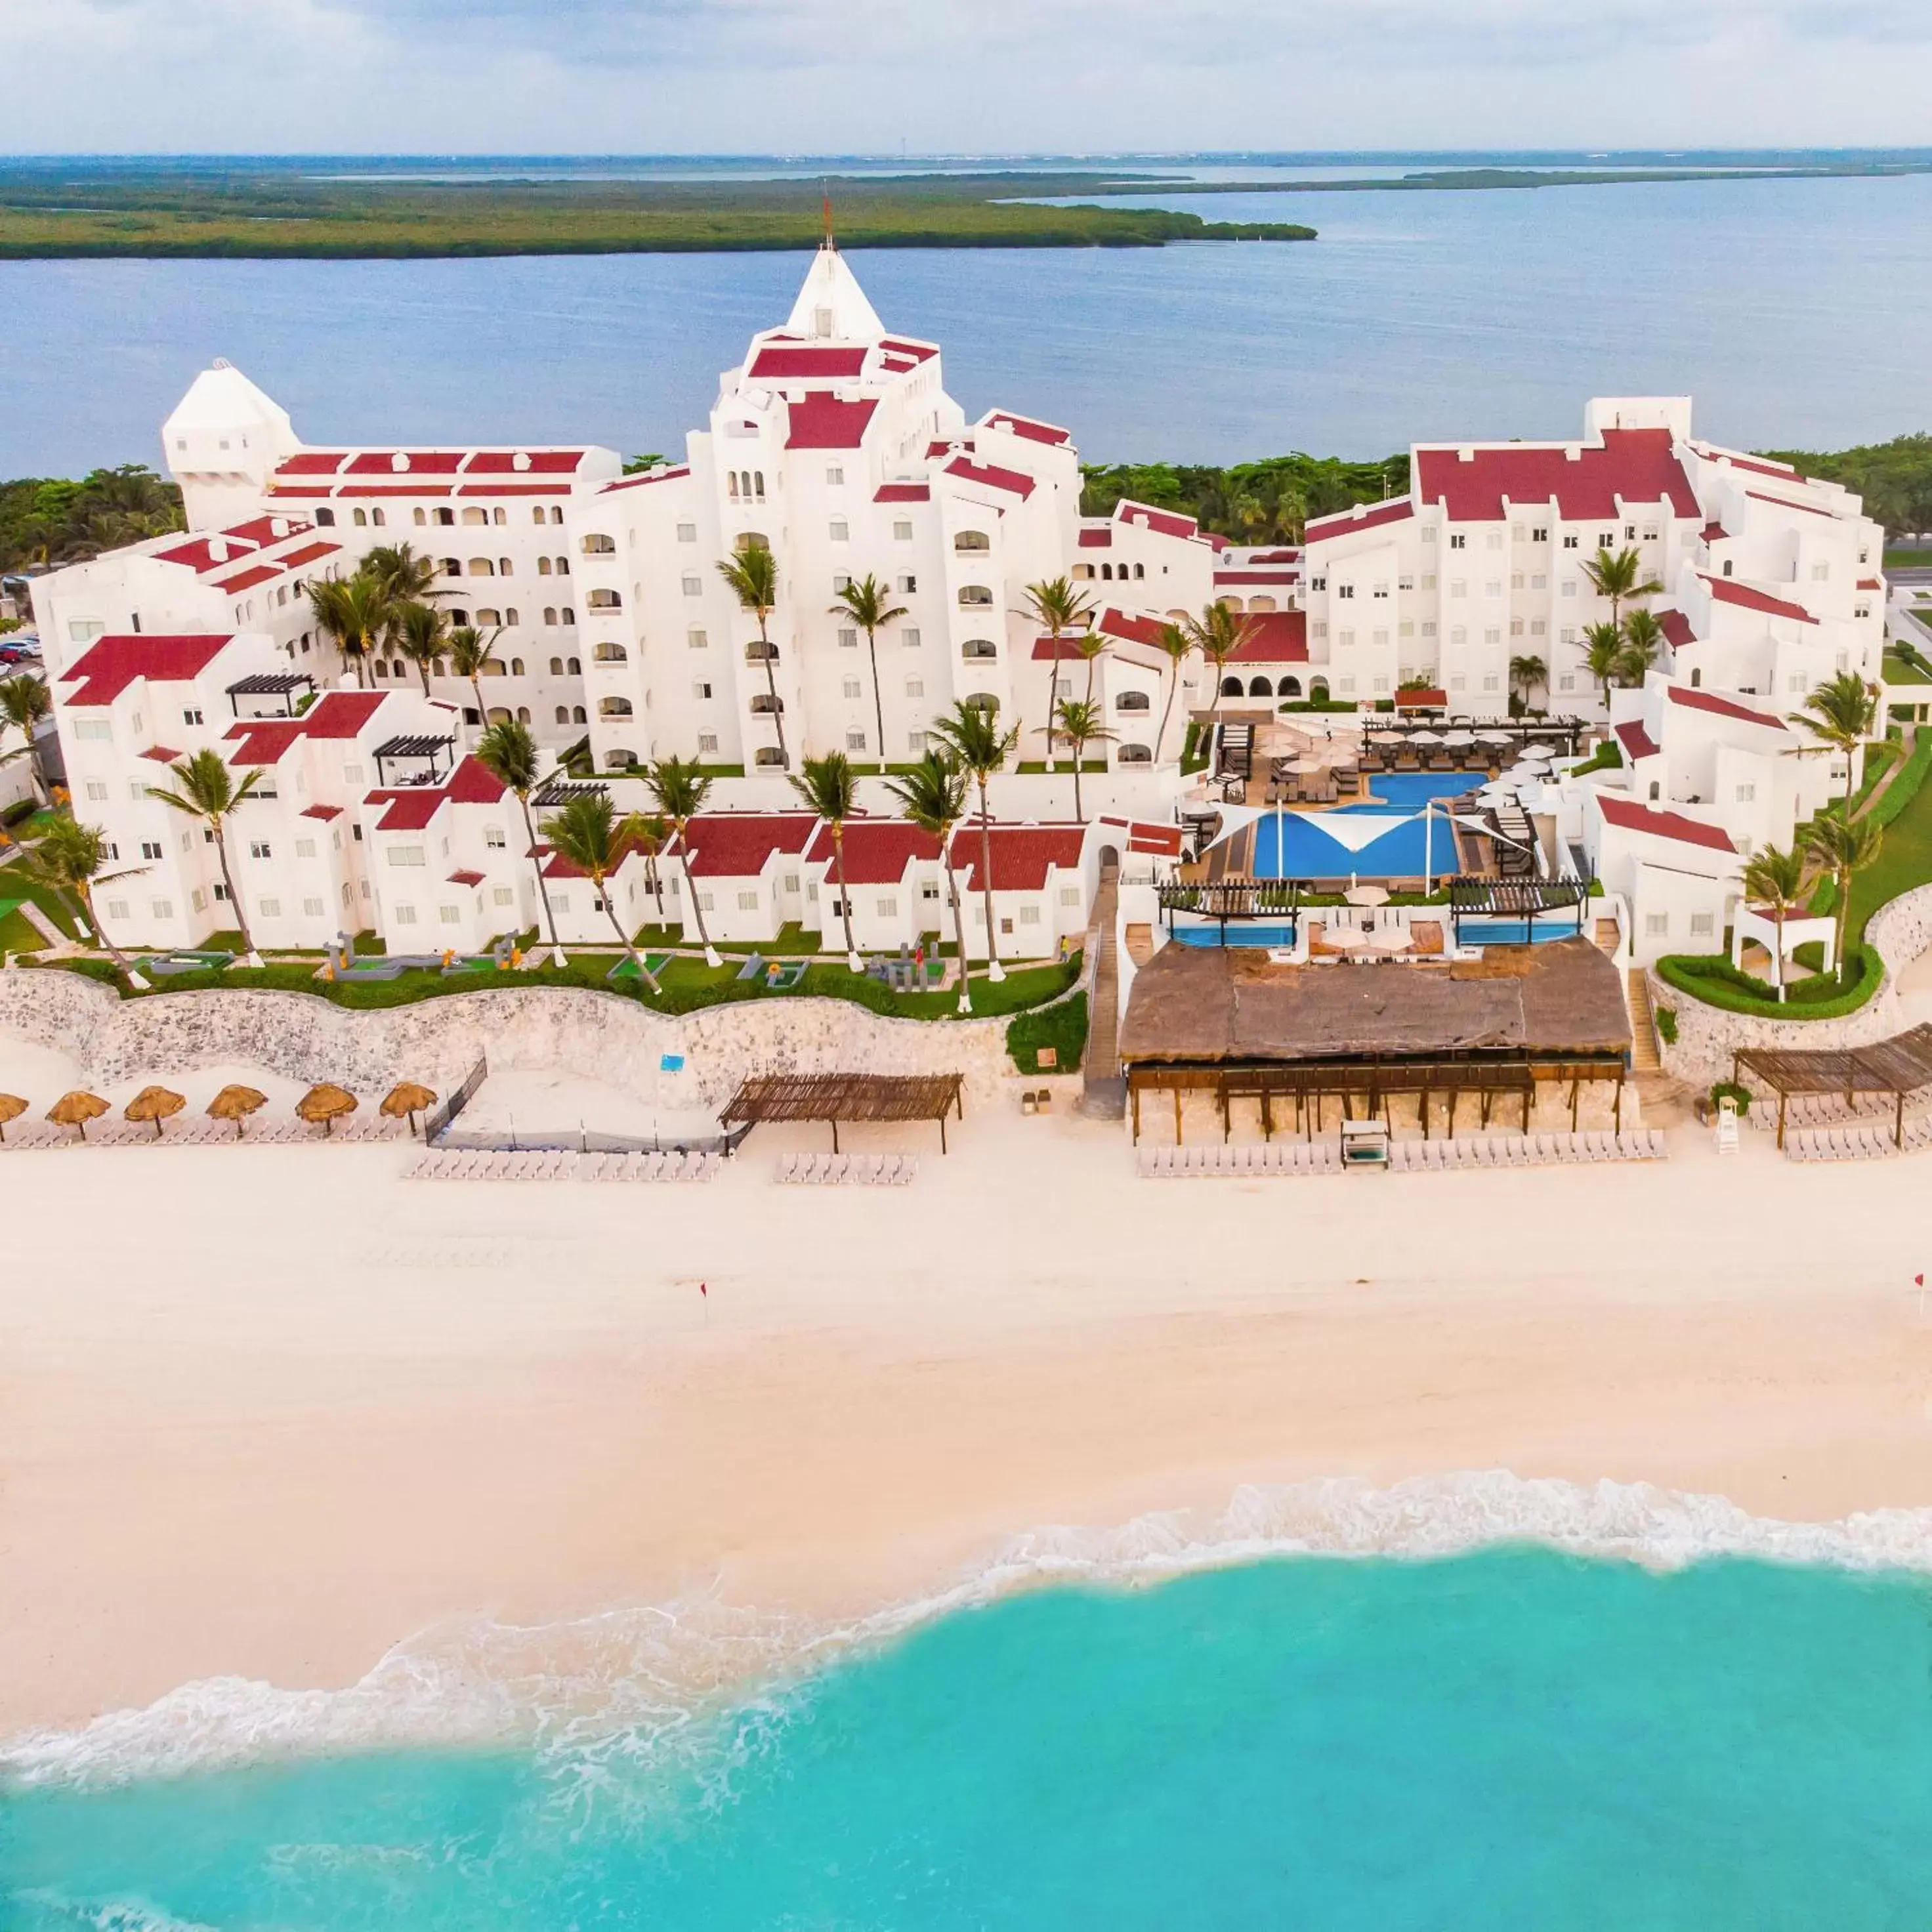 Bird's eye view, Bird's-eye View in GR Caribe Deluxe By Solaris All Inclusive